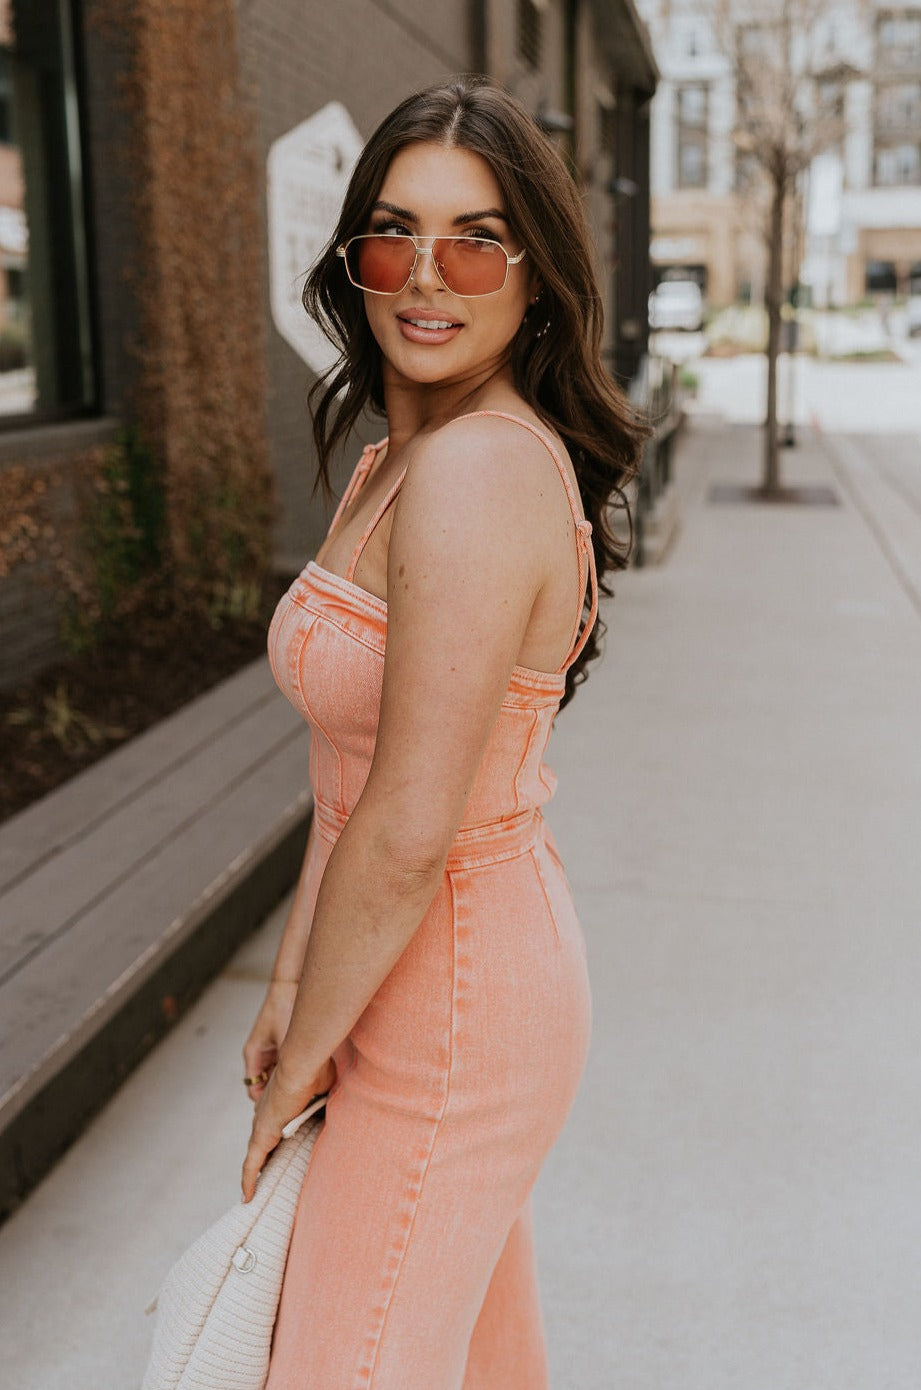 Upper body side view of brunette model wearing the Regan Wide Leg Denim Jumpsuit in Coral, that has coral denim fabric, wide legs, and thin straps. Model is holding beige purse in front of her.